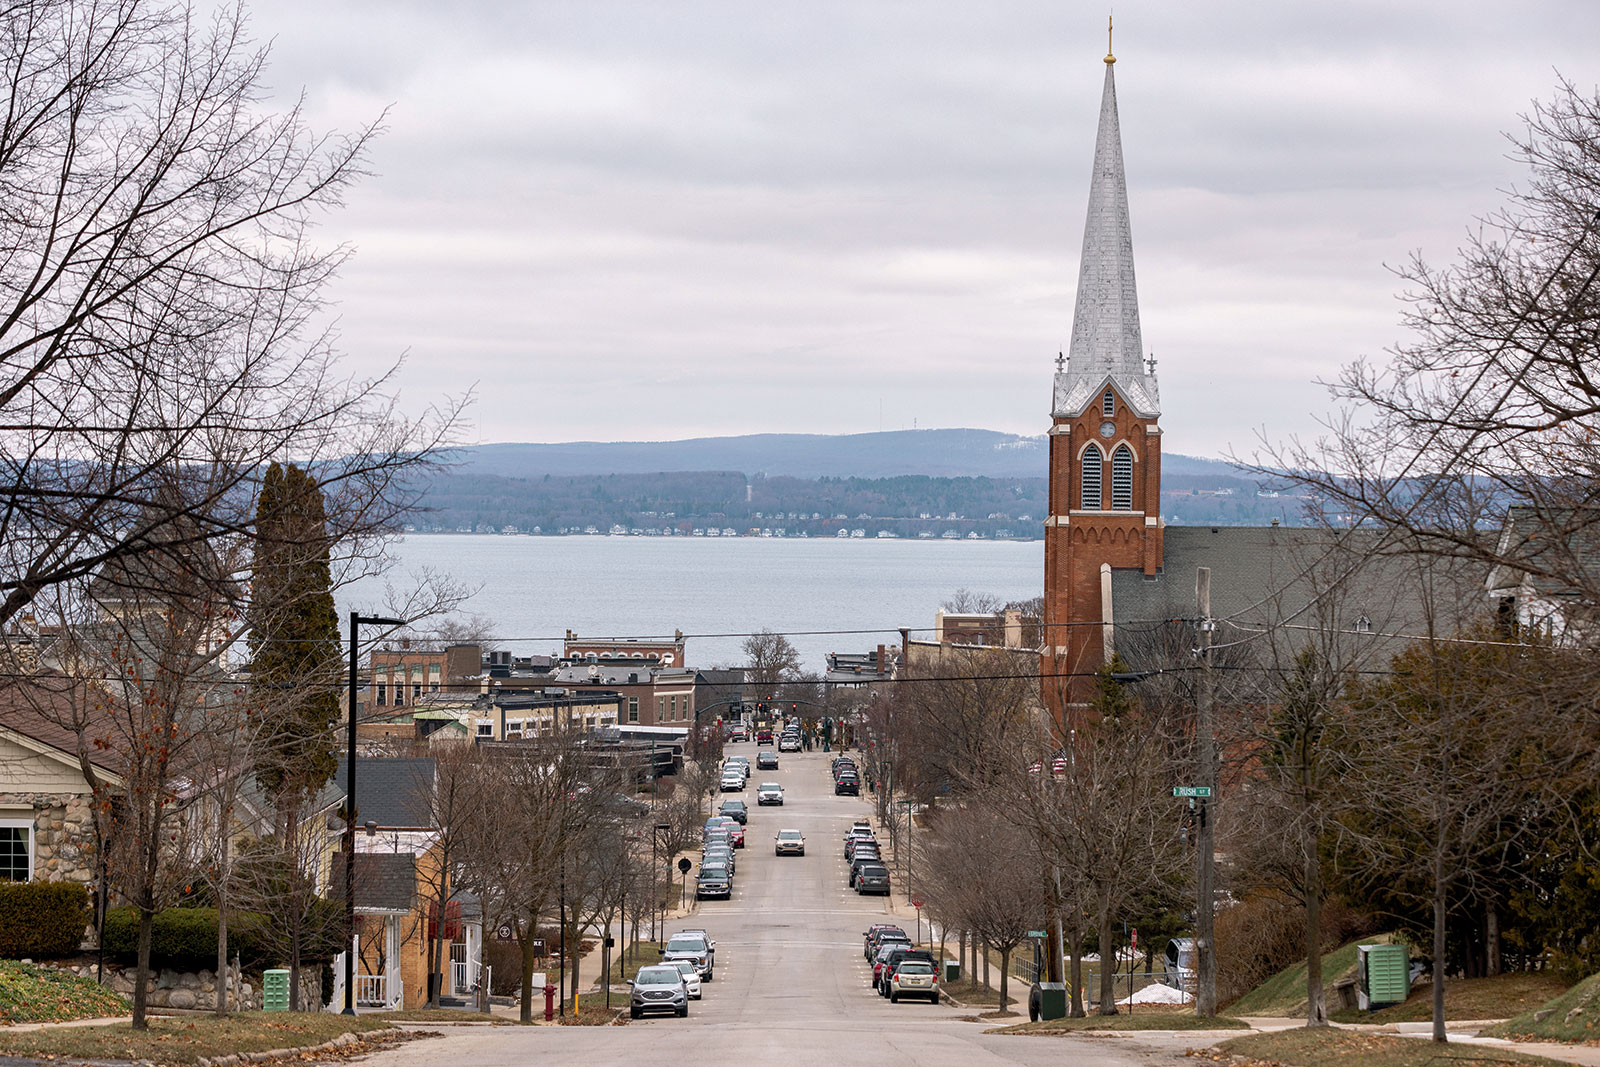 Nearly 100 miles of shoreline separate the Straits of Mackinac from Little Traverse Bay and the town of Petoskey, yet the area could be affected by a Line 5 rupture.